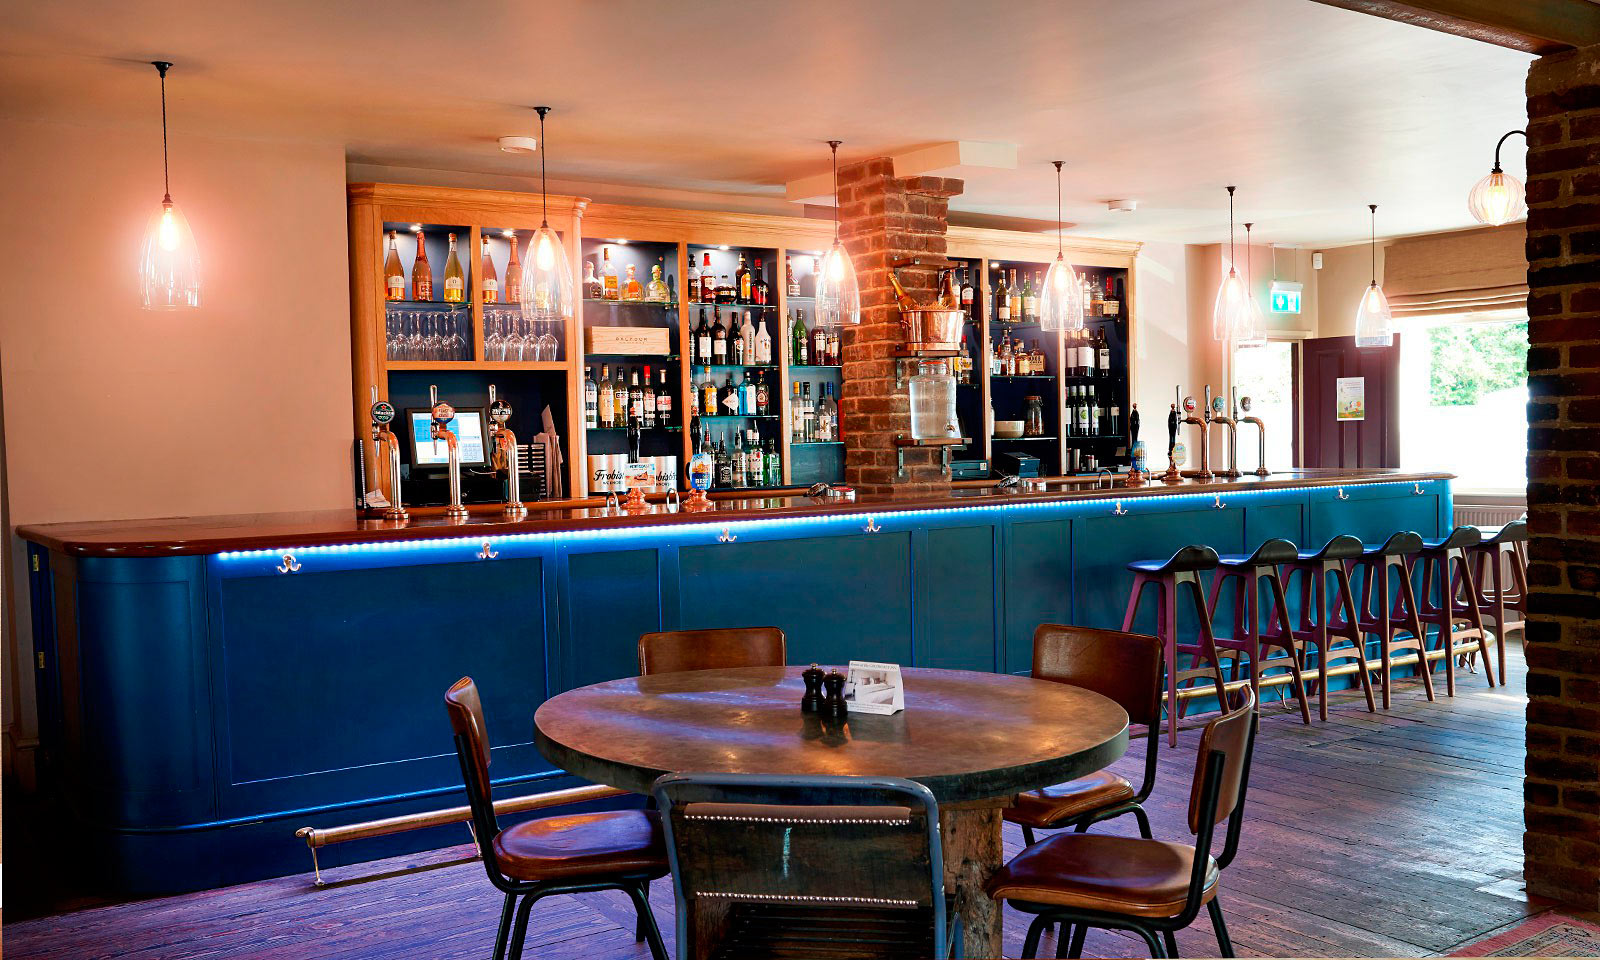 The Goudhurst Inn pub. Our commercial refurbishment for Hush Heath Hospitality. Commissioned to manufacture a bespoke, custom made, iroko bar and orangery restaurant. Another quality installation by the skilled joiners at Mounts Hill Woodcraft.